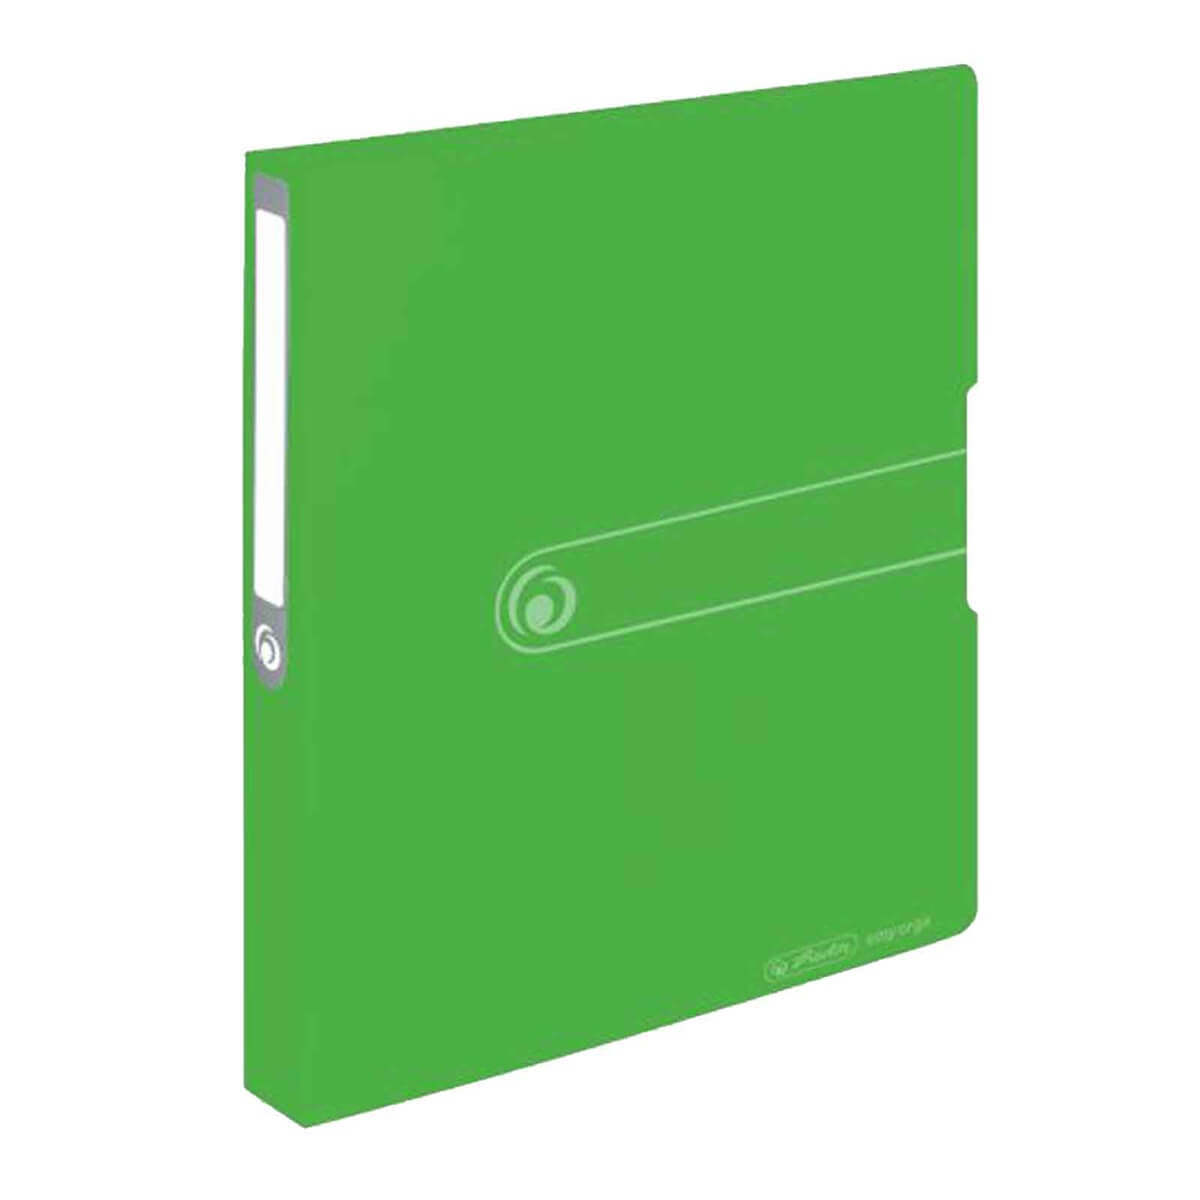 Herlitz Ring binder a4, 2 rings, 3,8cm spine, 25mm filling height opaque apple